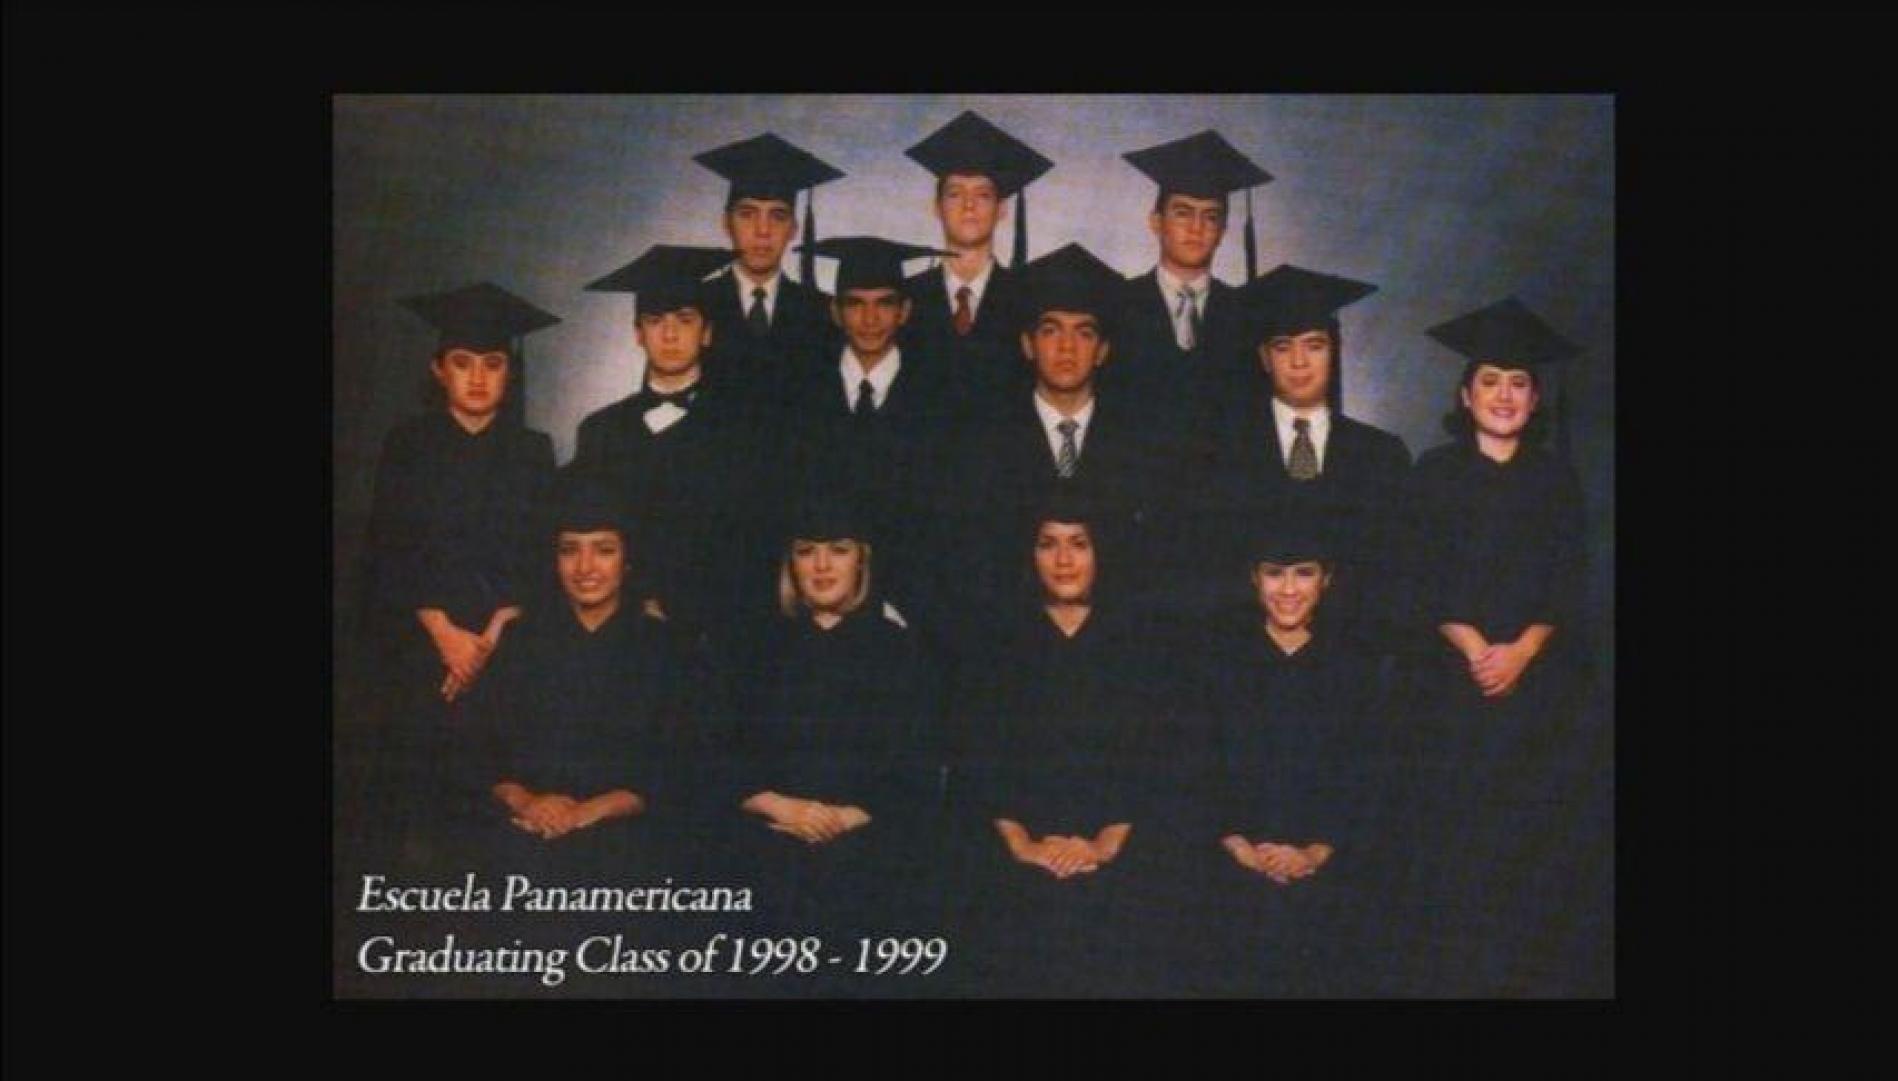 Several officials from the current administration graduated from the Escuela Panamericana, including the president himself. In the top row, from left to right, are the three inseparable friends: Nayib Bukele, Federico Anliker (current CEPA president), and Fernando López (current Environment Minister). Photo available on the Escuela Panamericana yearbook website. 